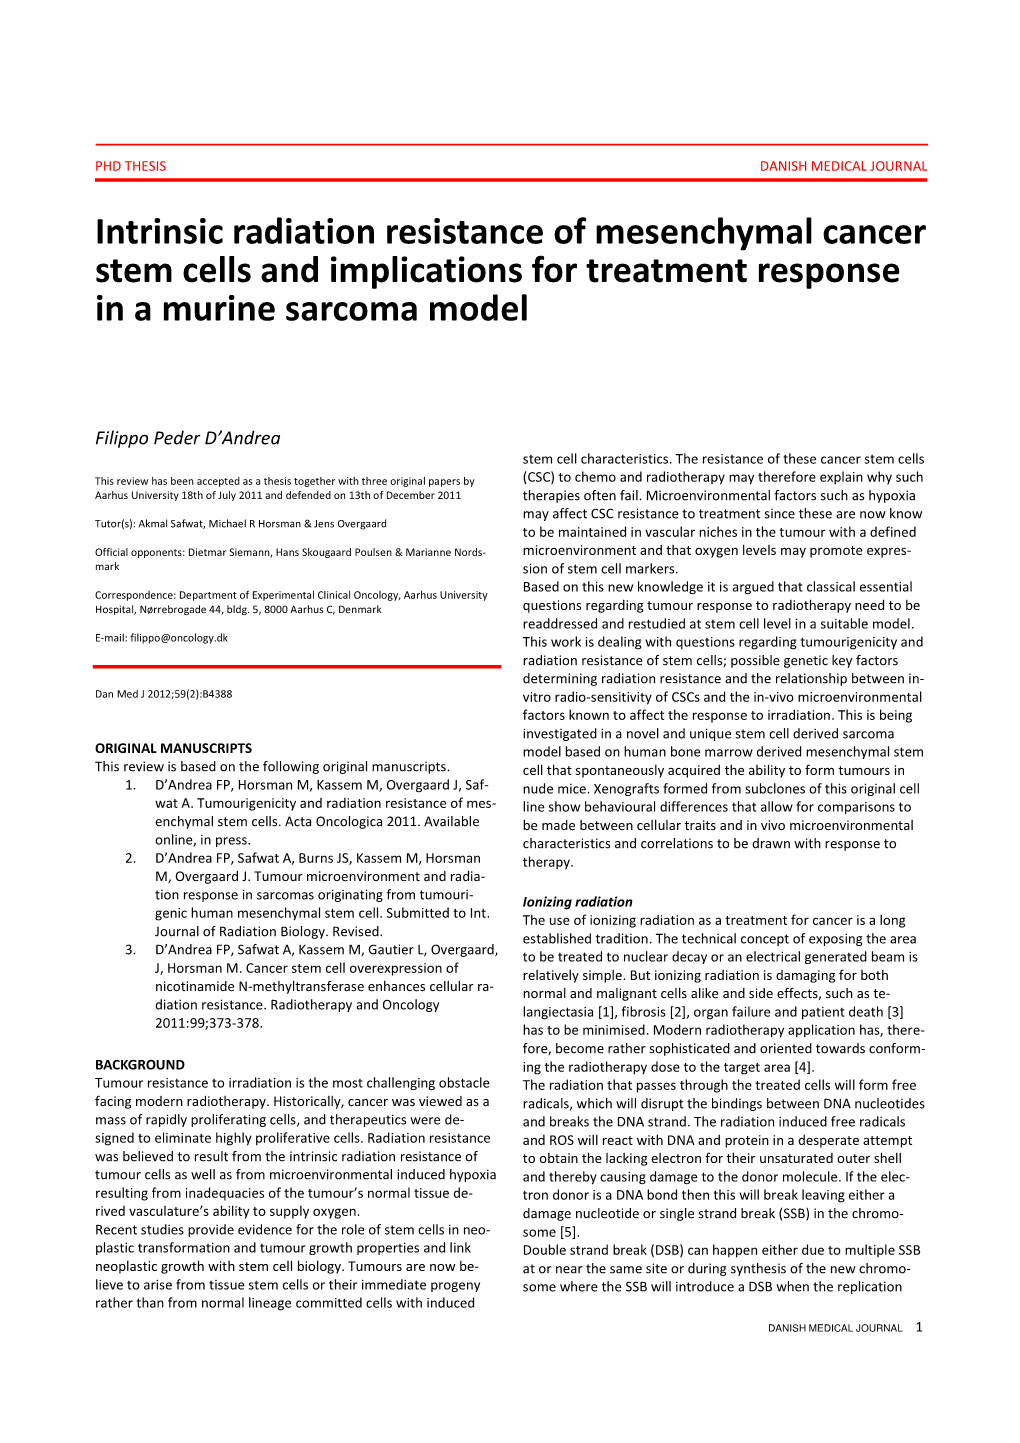 Intrinsic Radiation Resistance of Mesenchymal Cancer Stem Cells and Implications for Treatment Response in a Murine Sarcoma Model